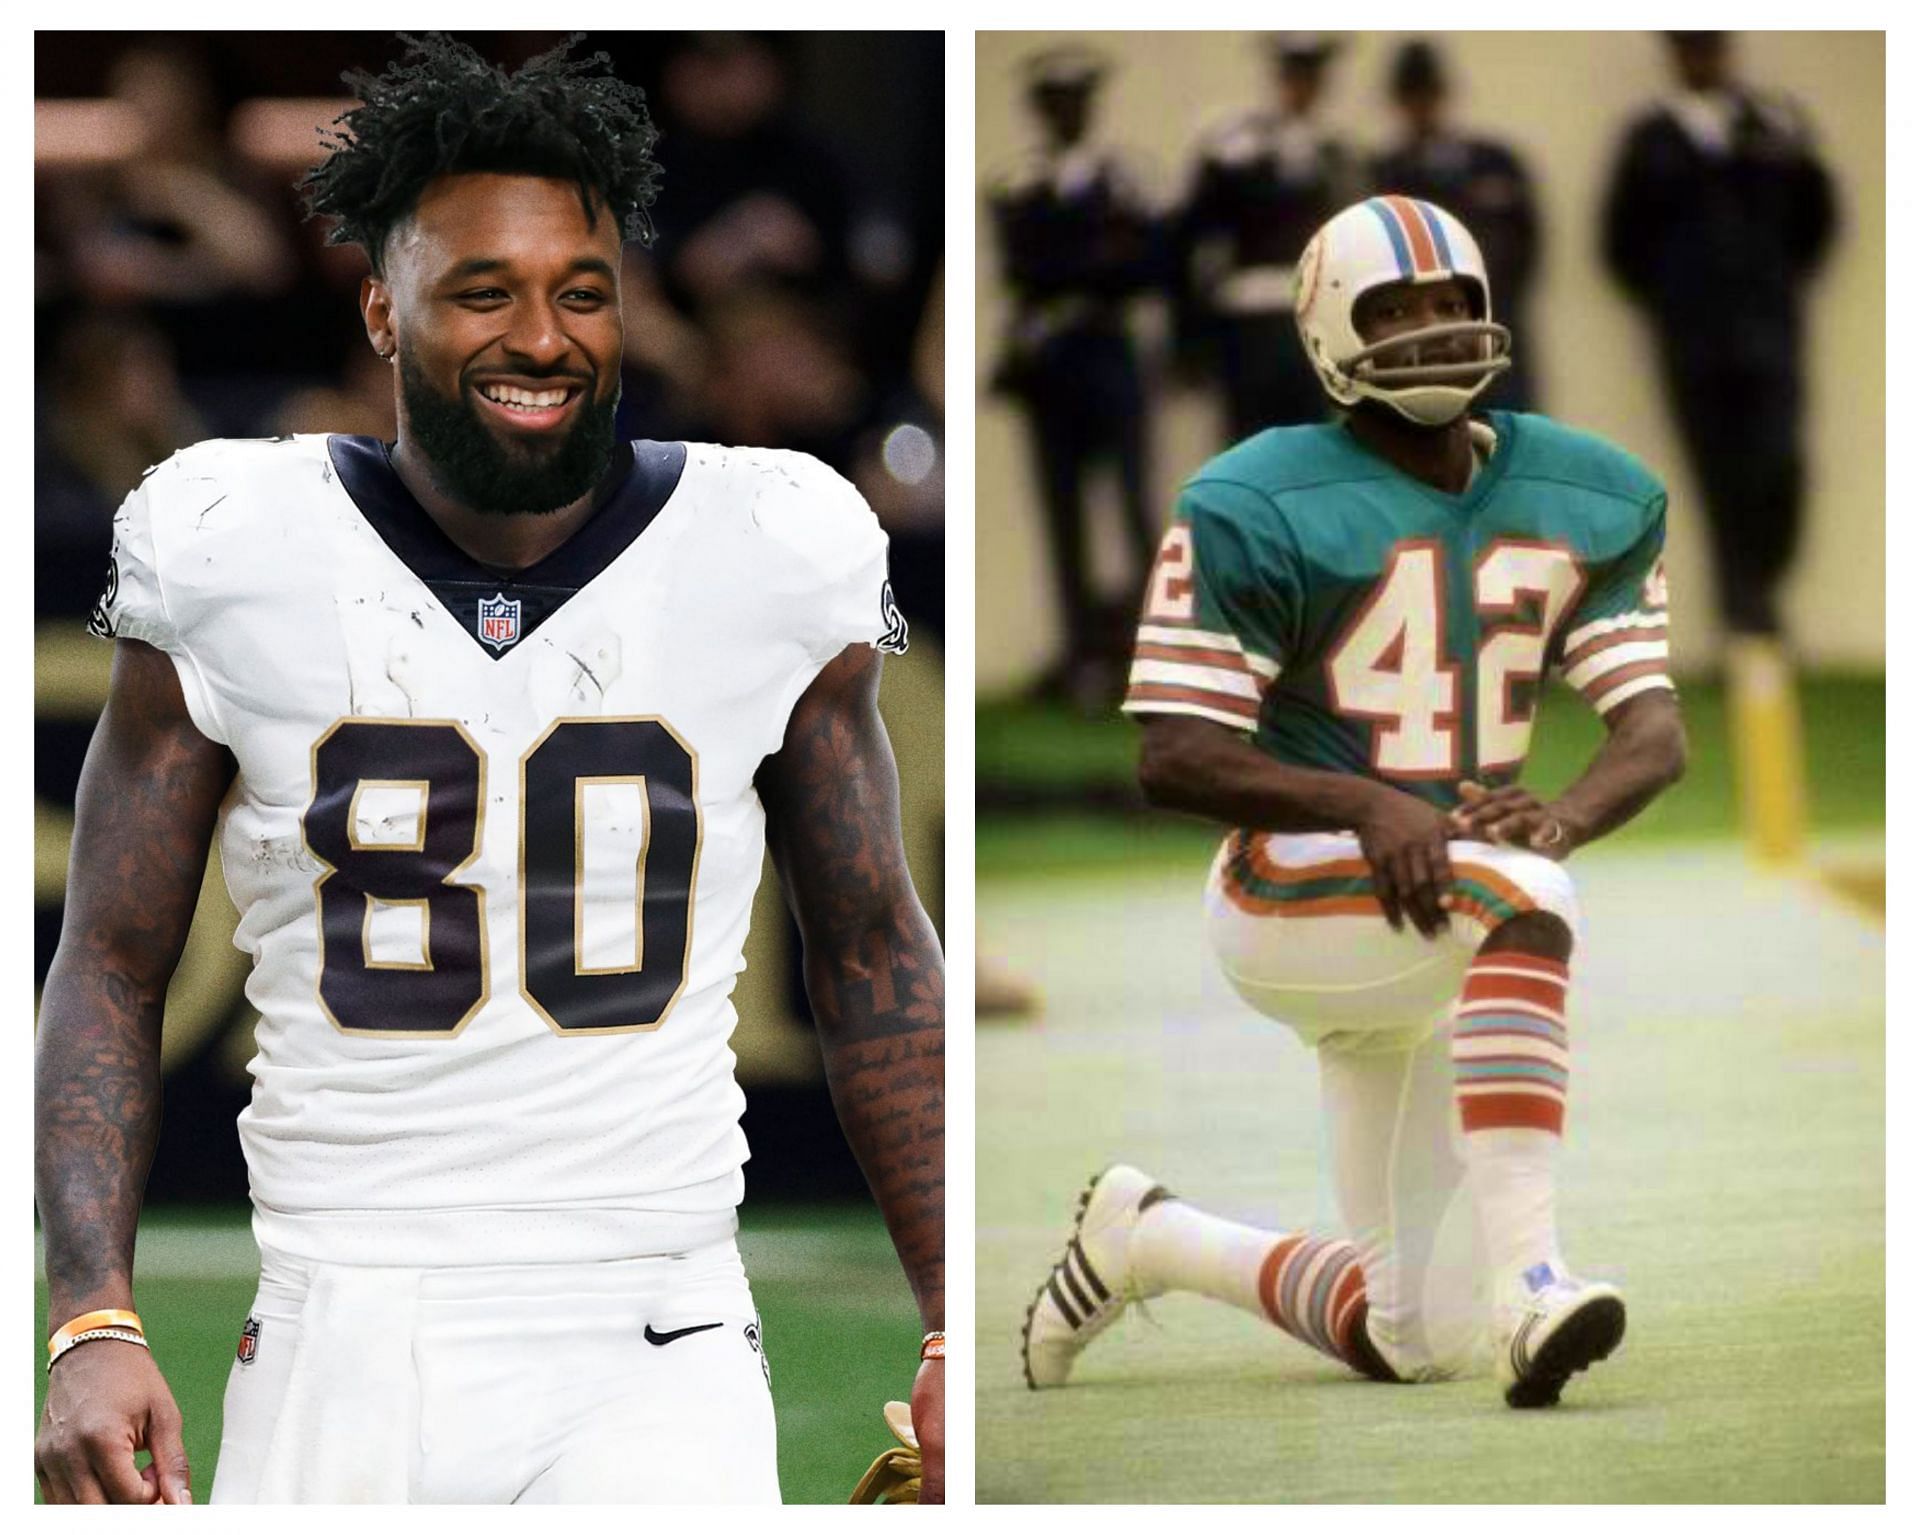 Which player played for Dolphins and Browns?